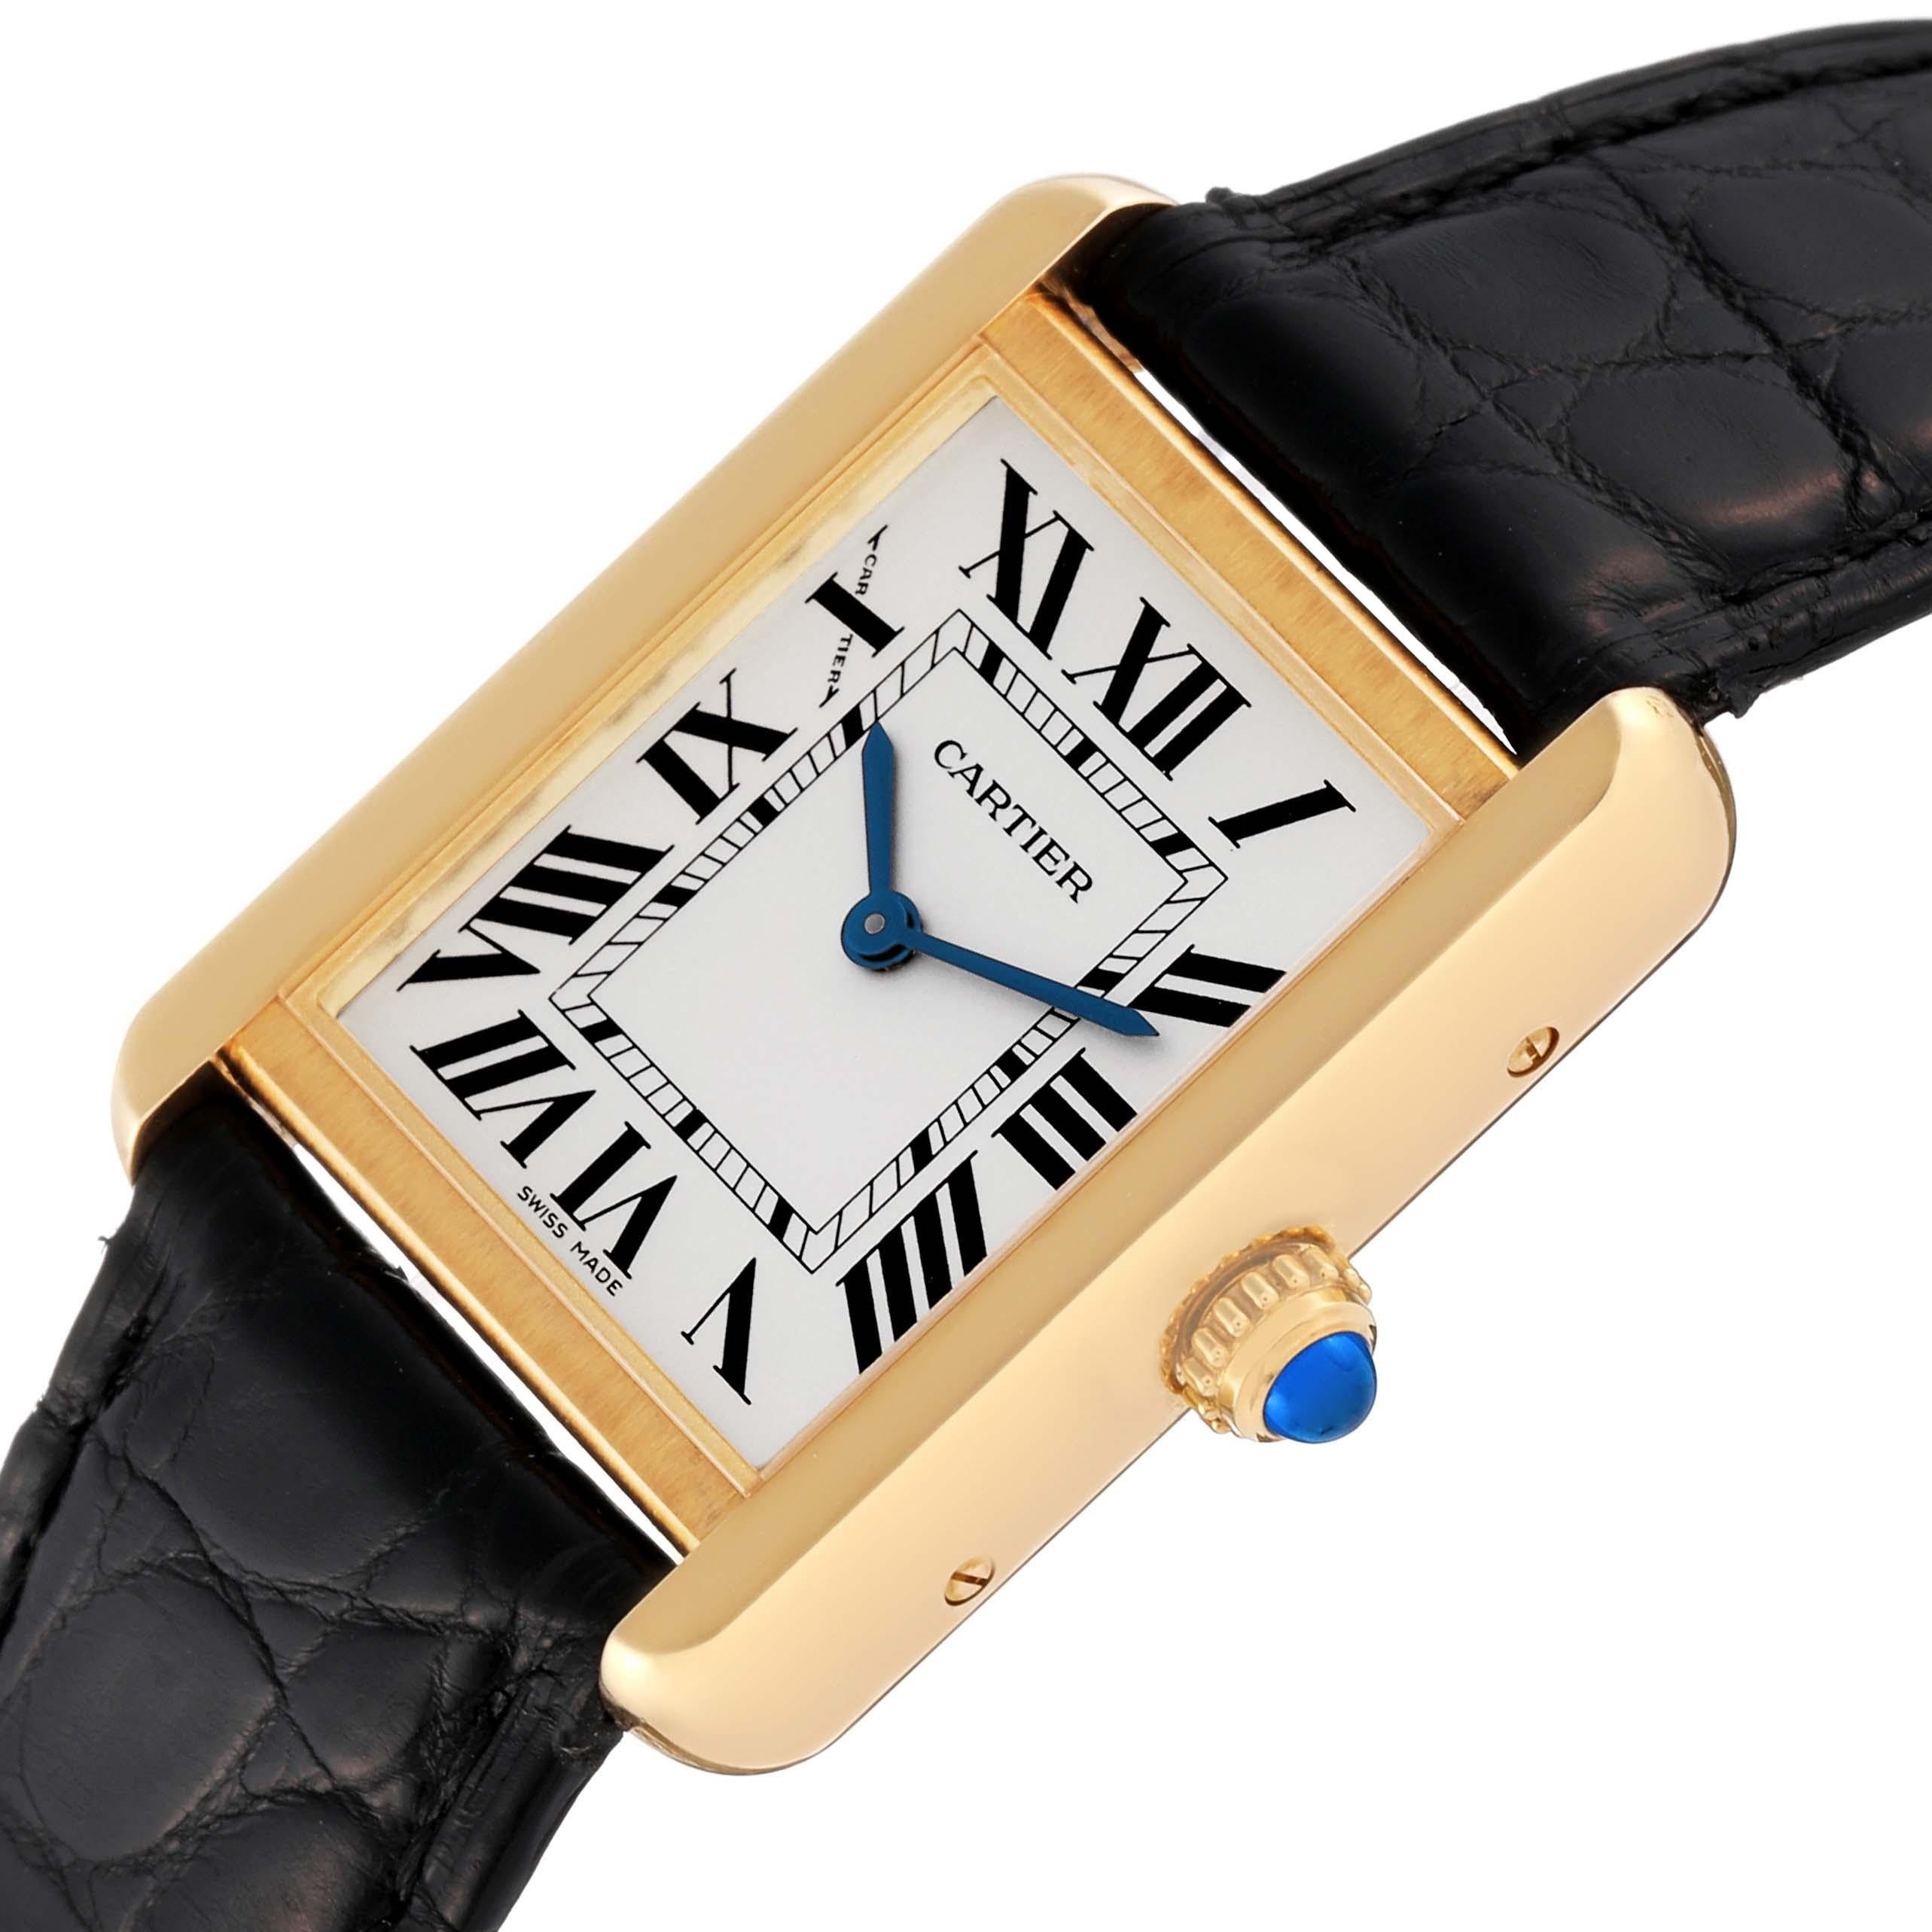 Cartier Tank Solo Yellow Gold Steel Silver Dial Ladies Watch W5200002 Card. Quartz movement. 18k yellow gold case 30.0 x 24.4 mm. Stainless steel caseback. Circular grained crown set with blue spinel cabochon. . Scratch resistant sapphire crystal.